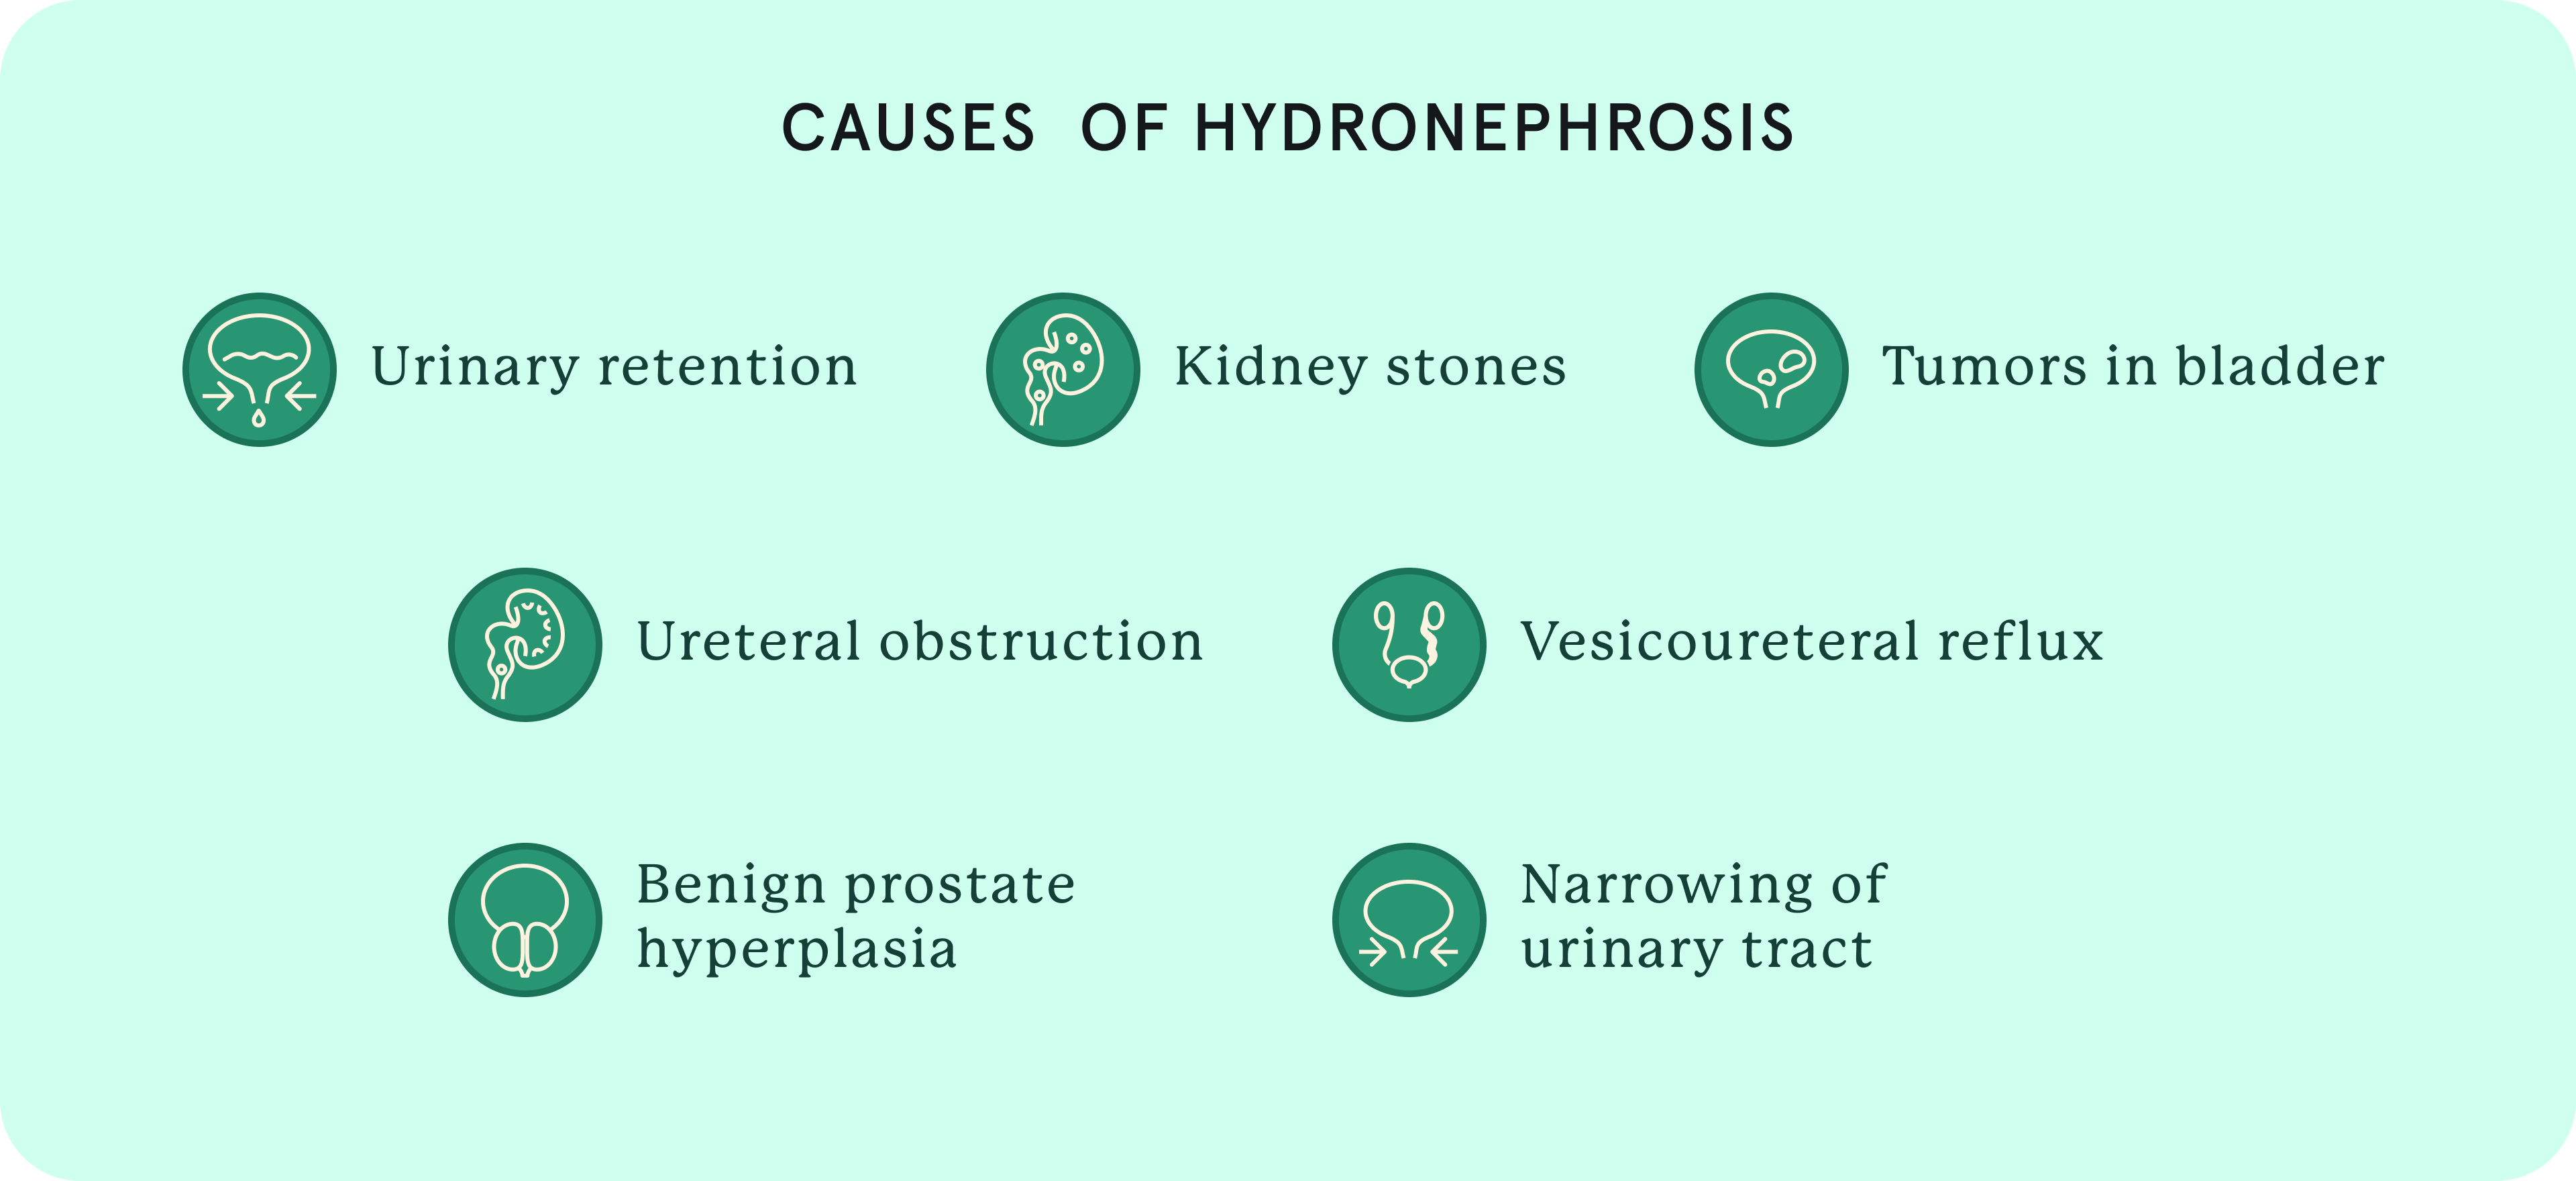 Causes of hydronephrosis